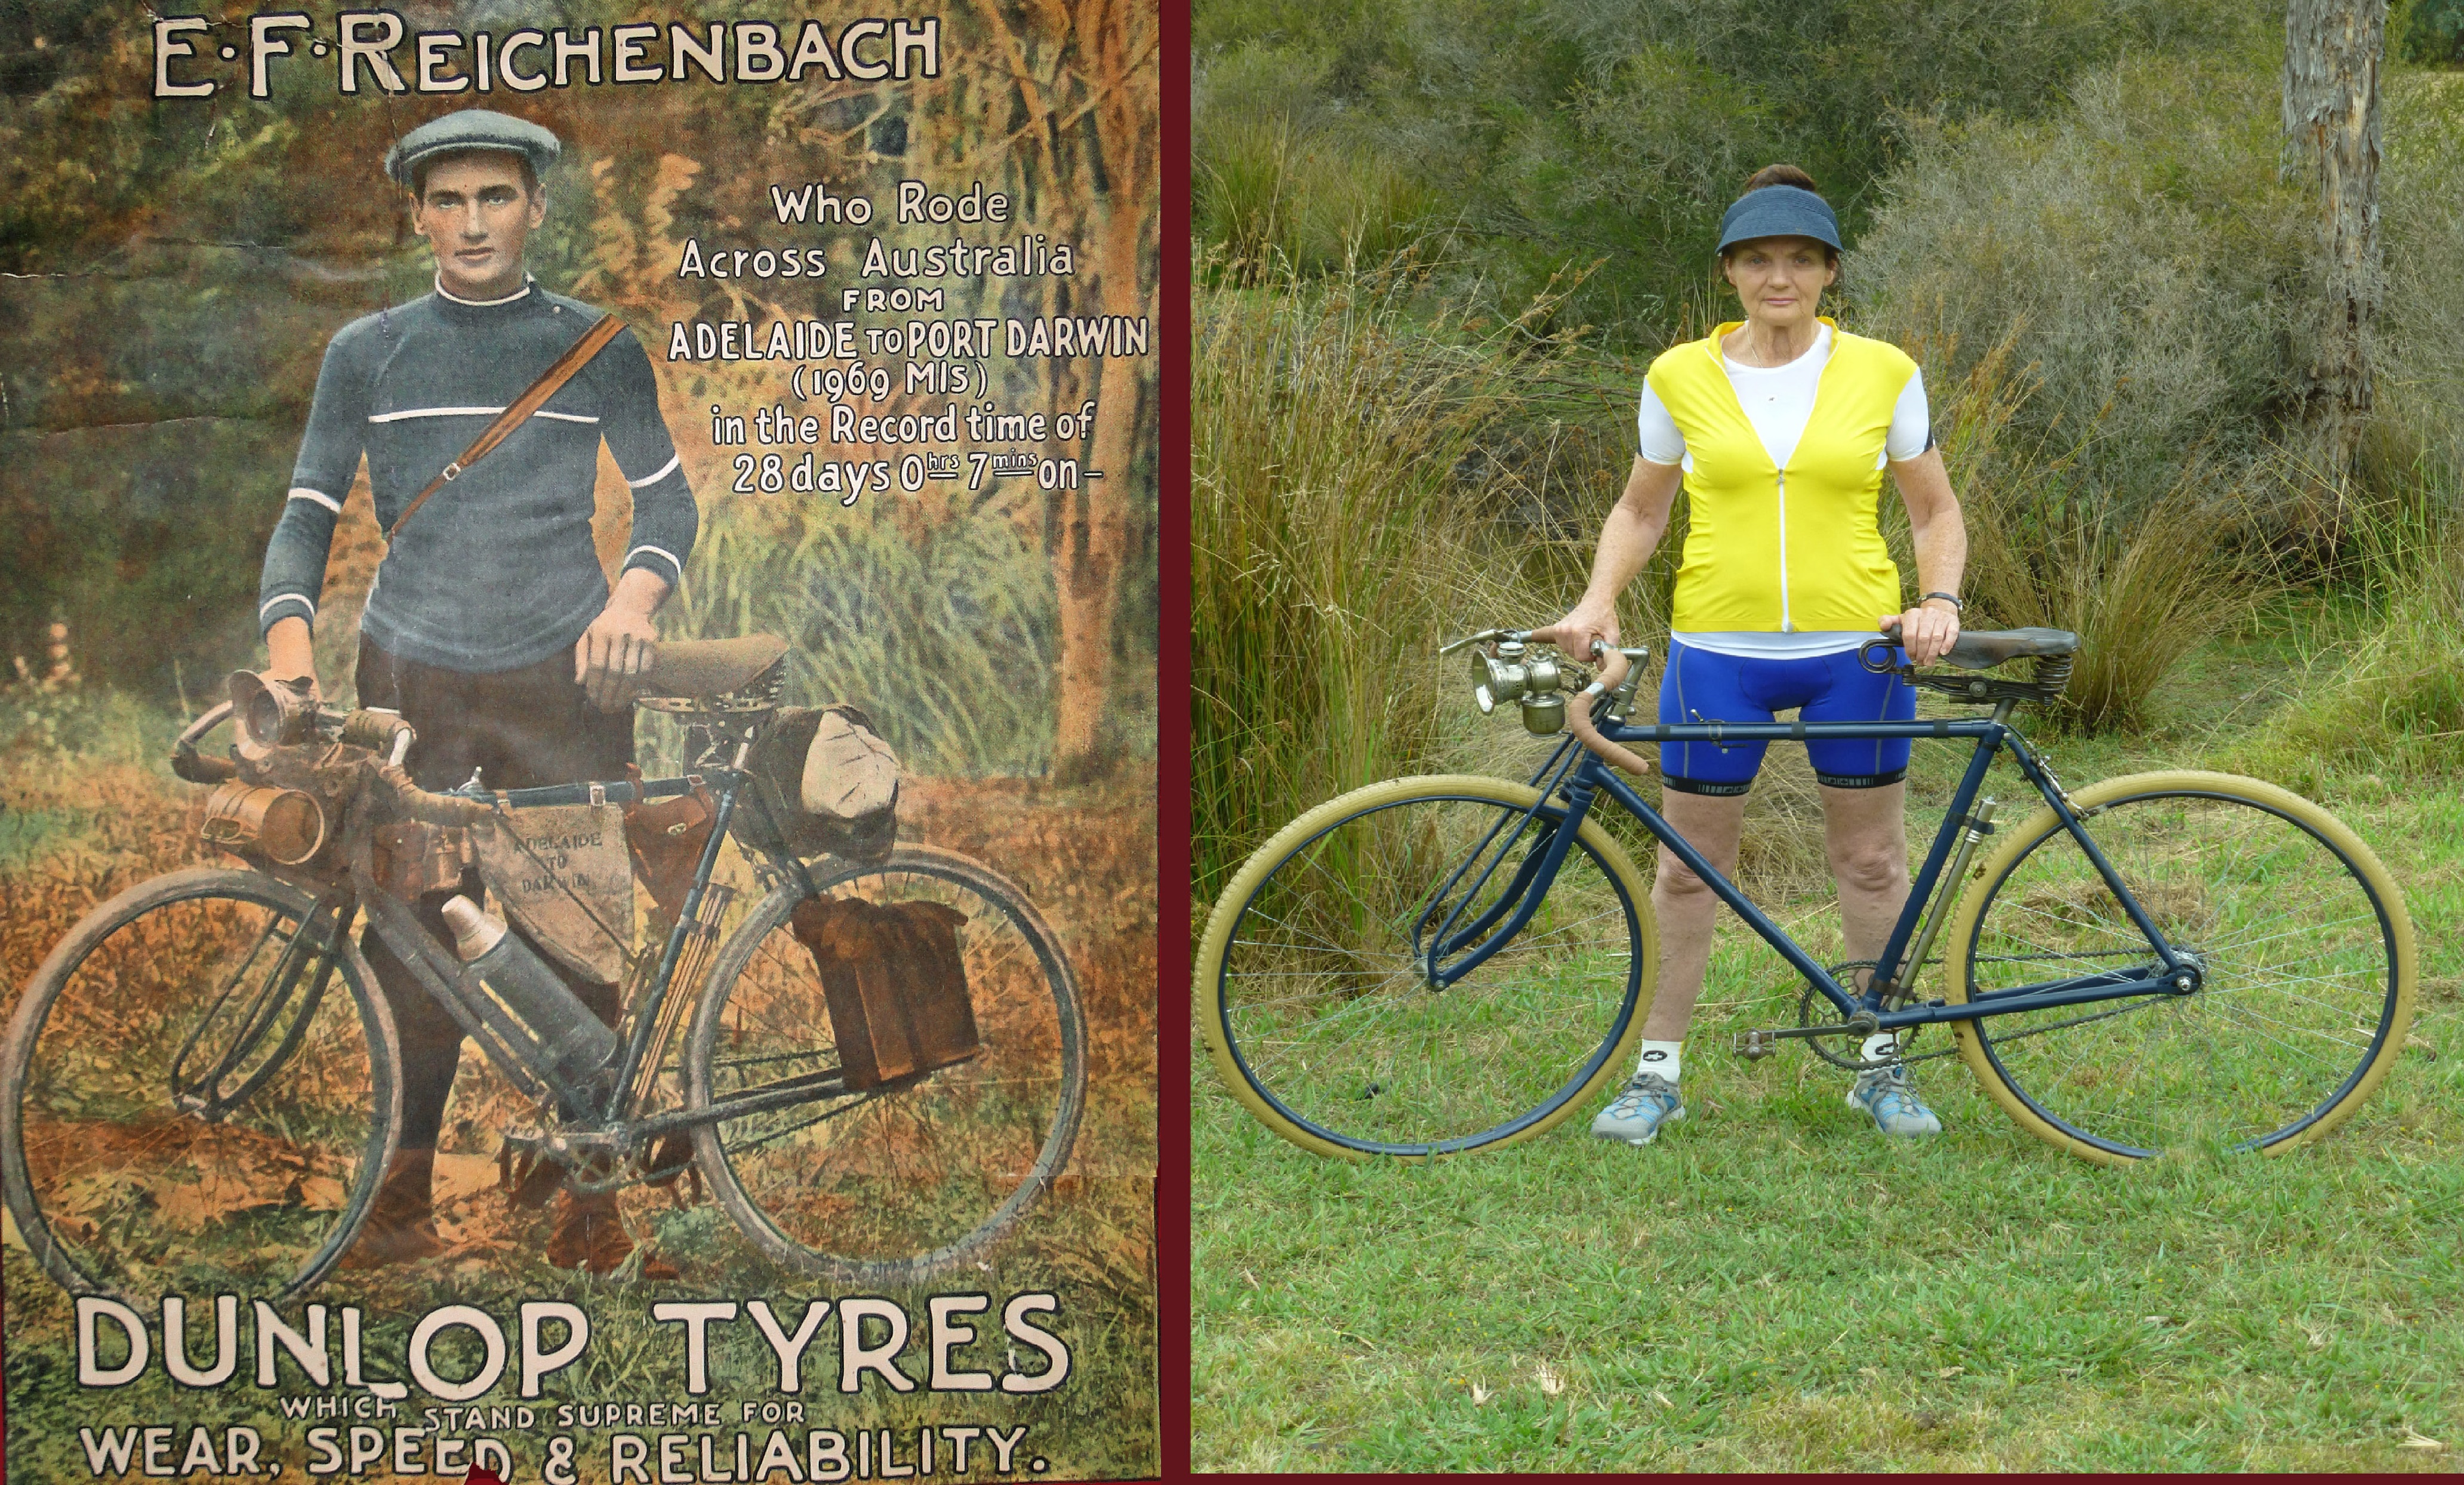 Magazine cover of Ted Ryko next to image of Michelle Adler with bike/